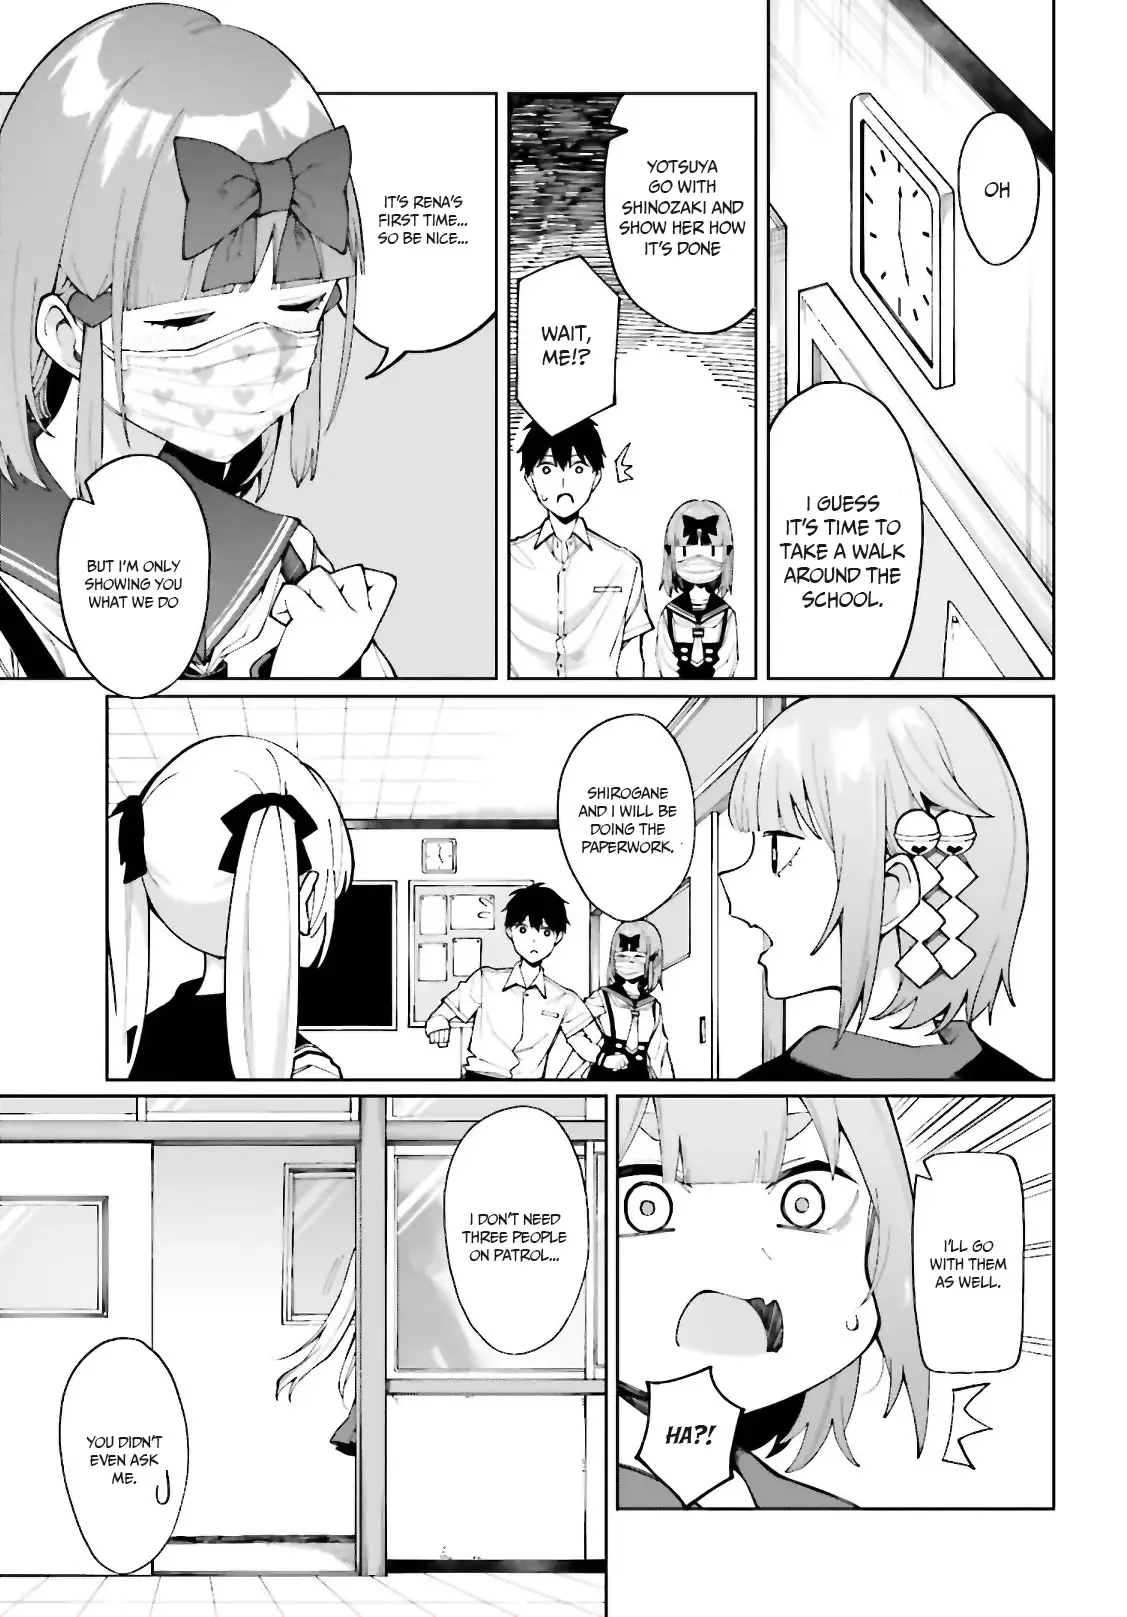 I Don't Understand Shirogane-San's Facial Expression At All - 7 page 6-74c61c93